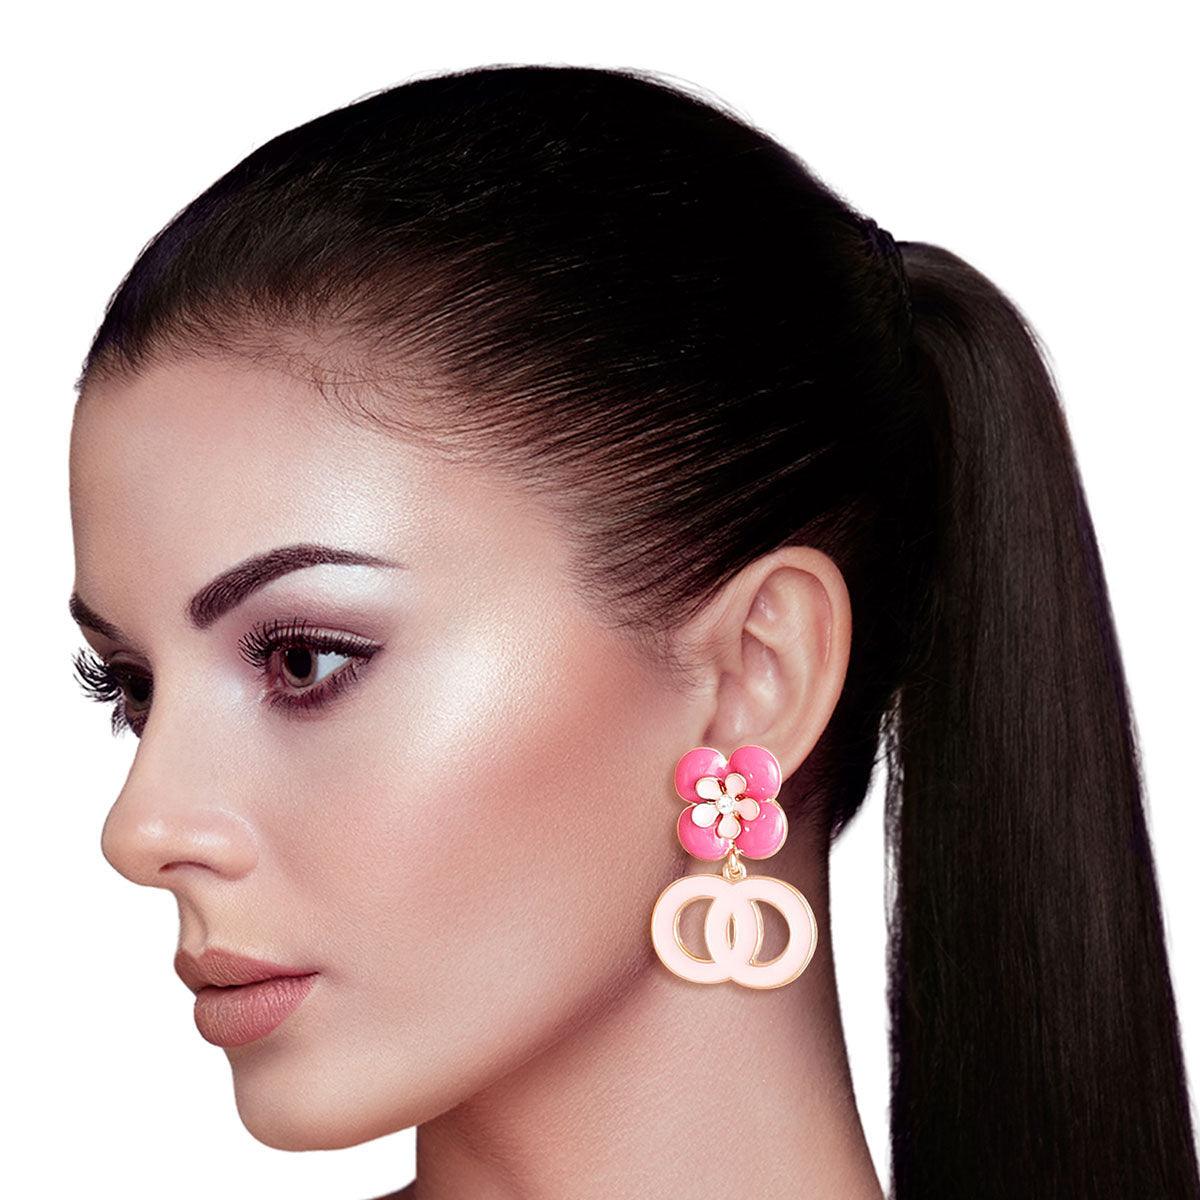 Pink Infinity Earrings with Flower Studs Sweet Statement